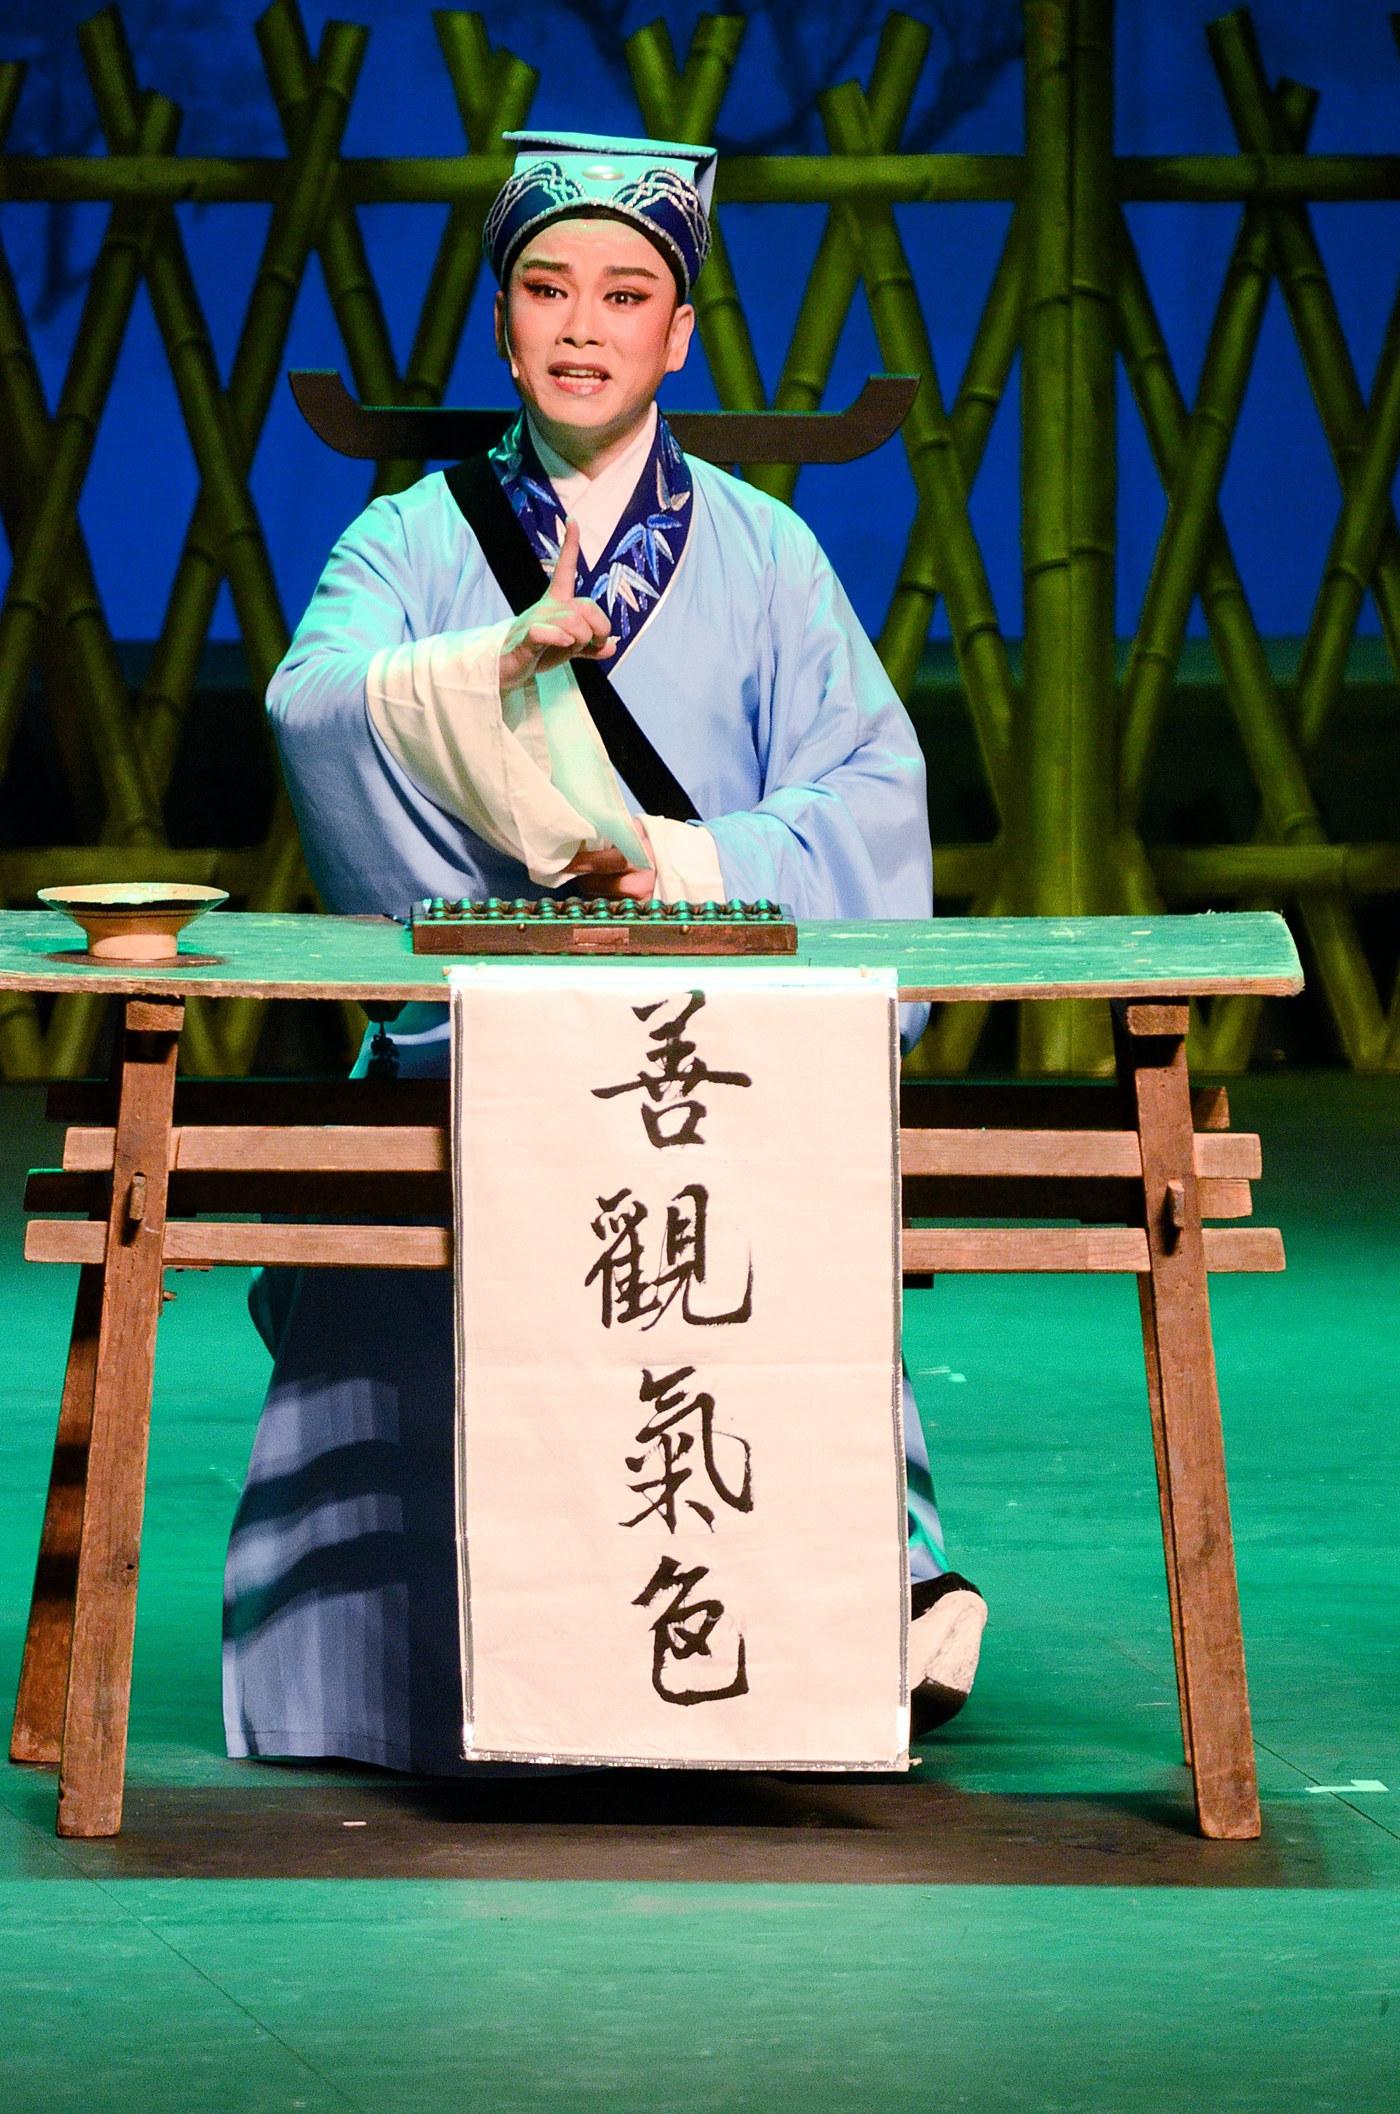 Over 10 renowned winners of the China Theatre Plum Blossom Award of Yue opera will visit Hong Kong for the programme "A Stellar Meet featuring Plum Blossom Award Winners in Yue Opera" under the Chinese Opera Festival 2023 in August. Photo shows a scene from "He Wenxiu".